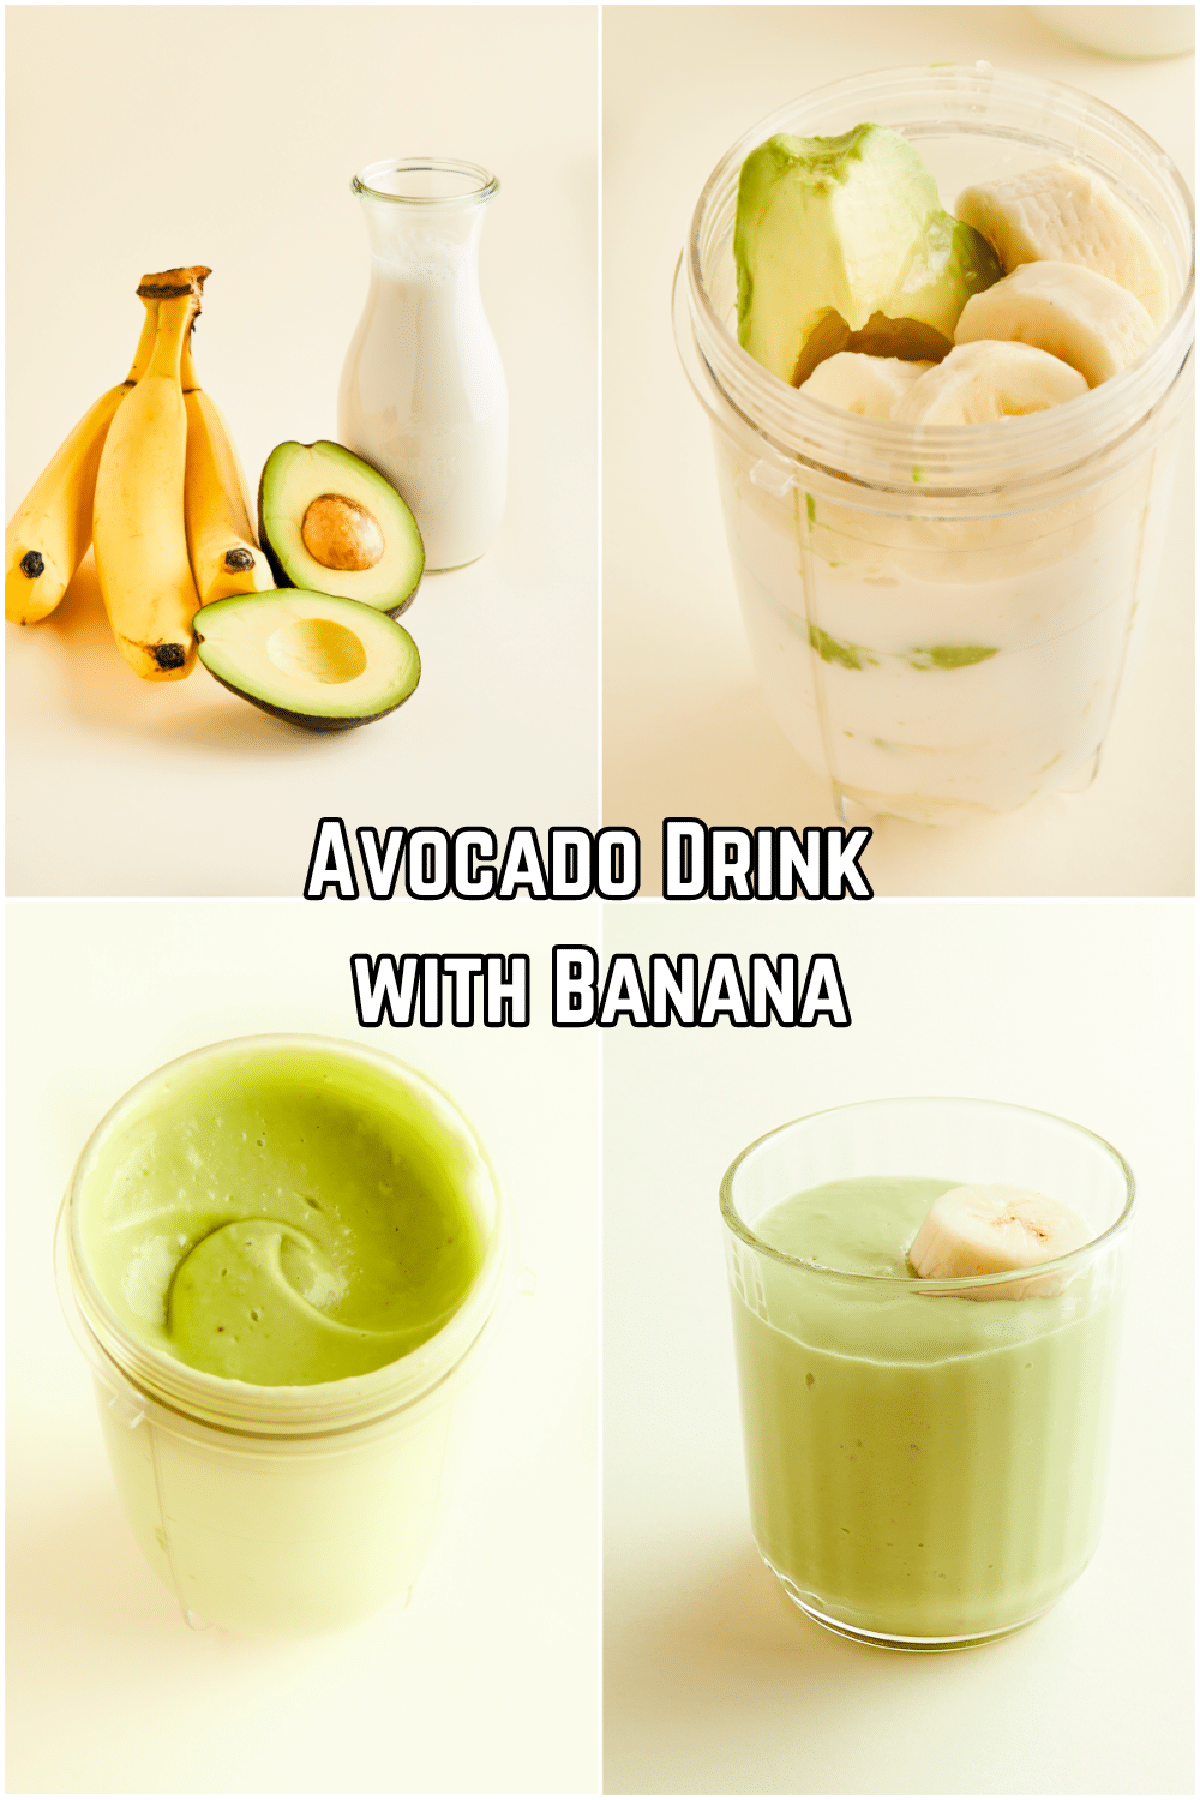 A four image collage shows how to make es pokat avocado drink with bananas.